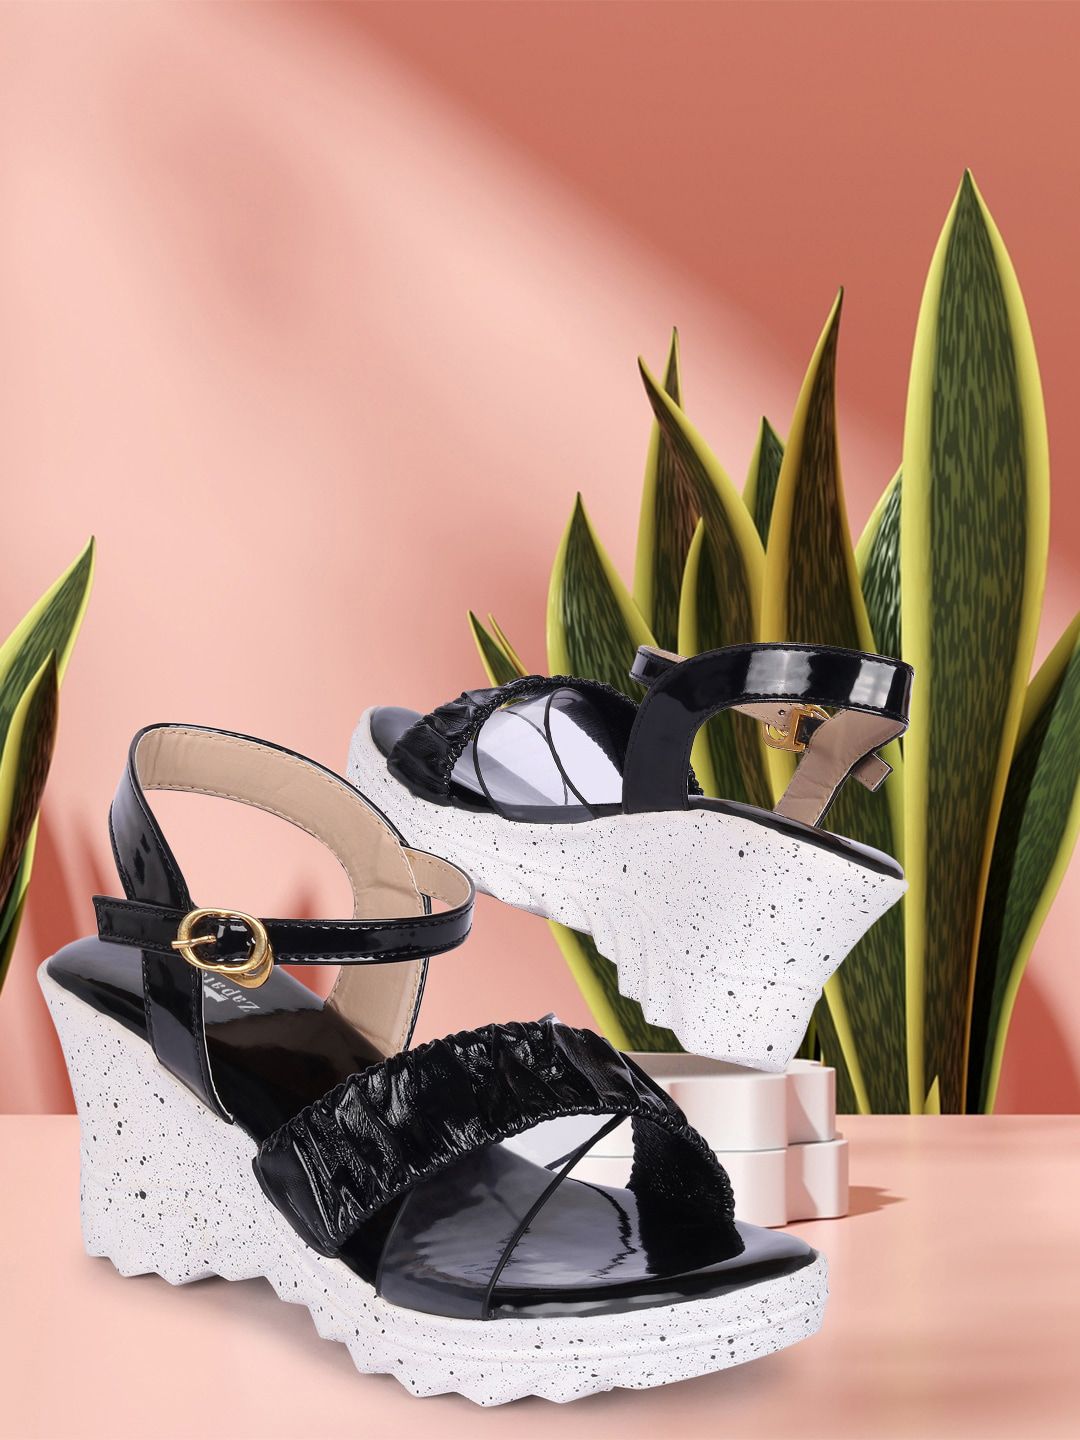 ZAPATOZ Black Textured Wedge Heels with Buckles Price in India